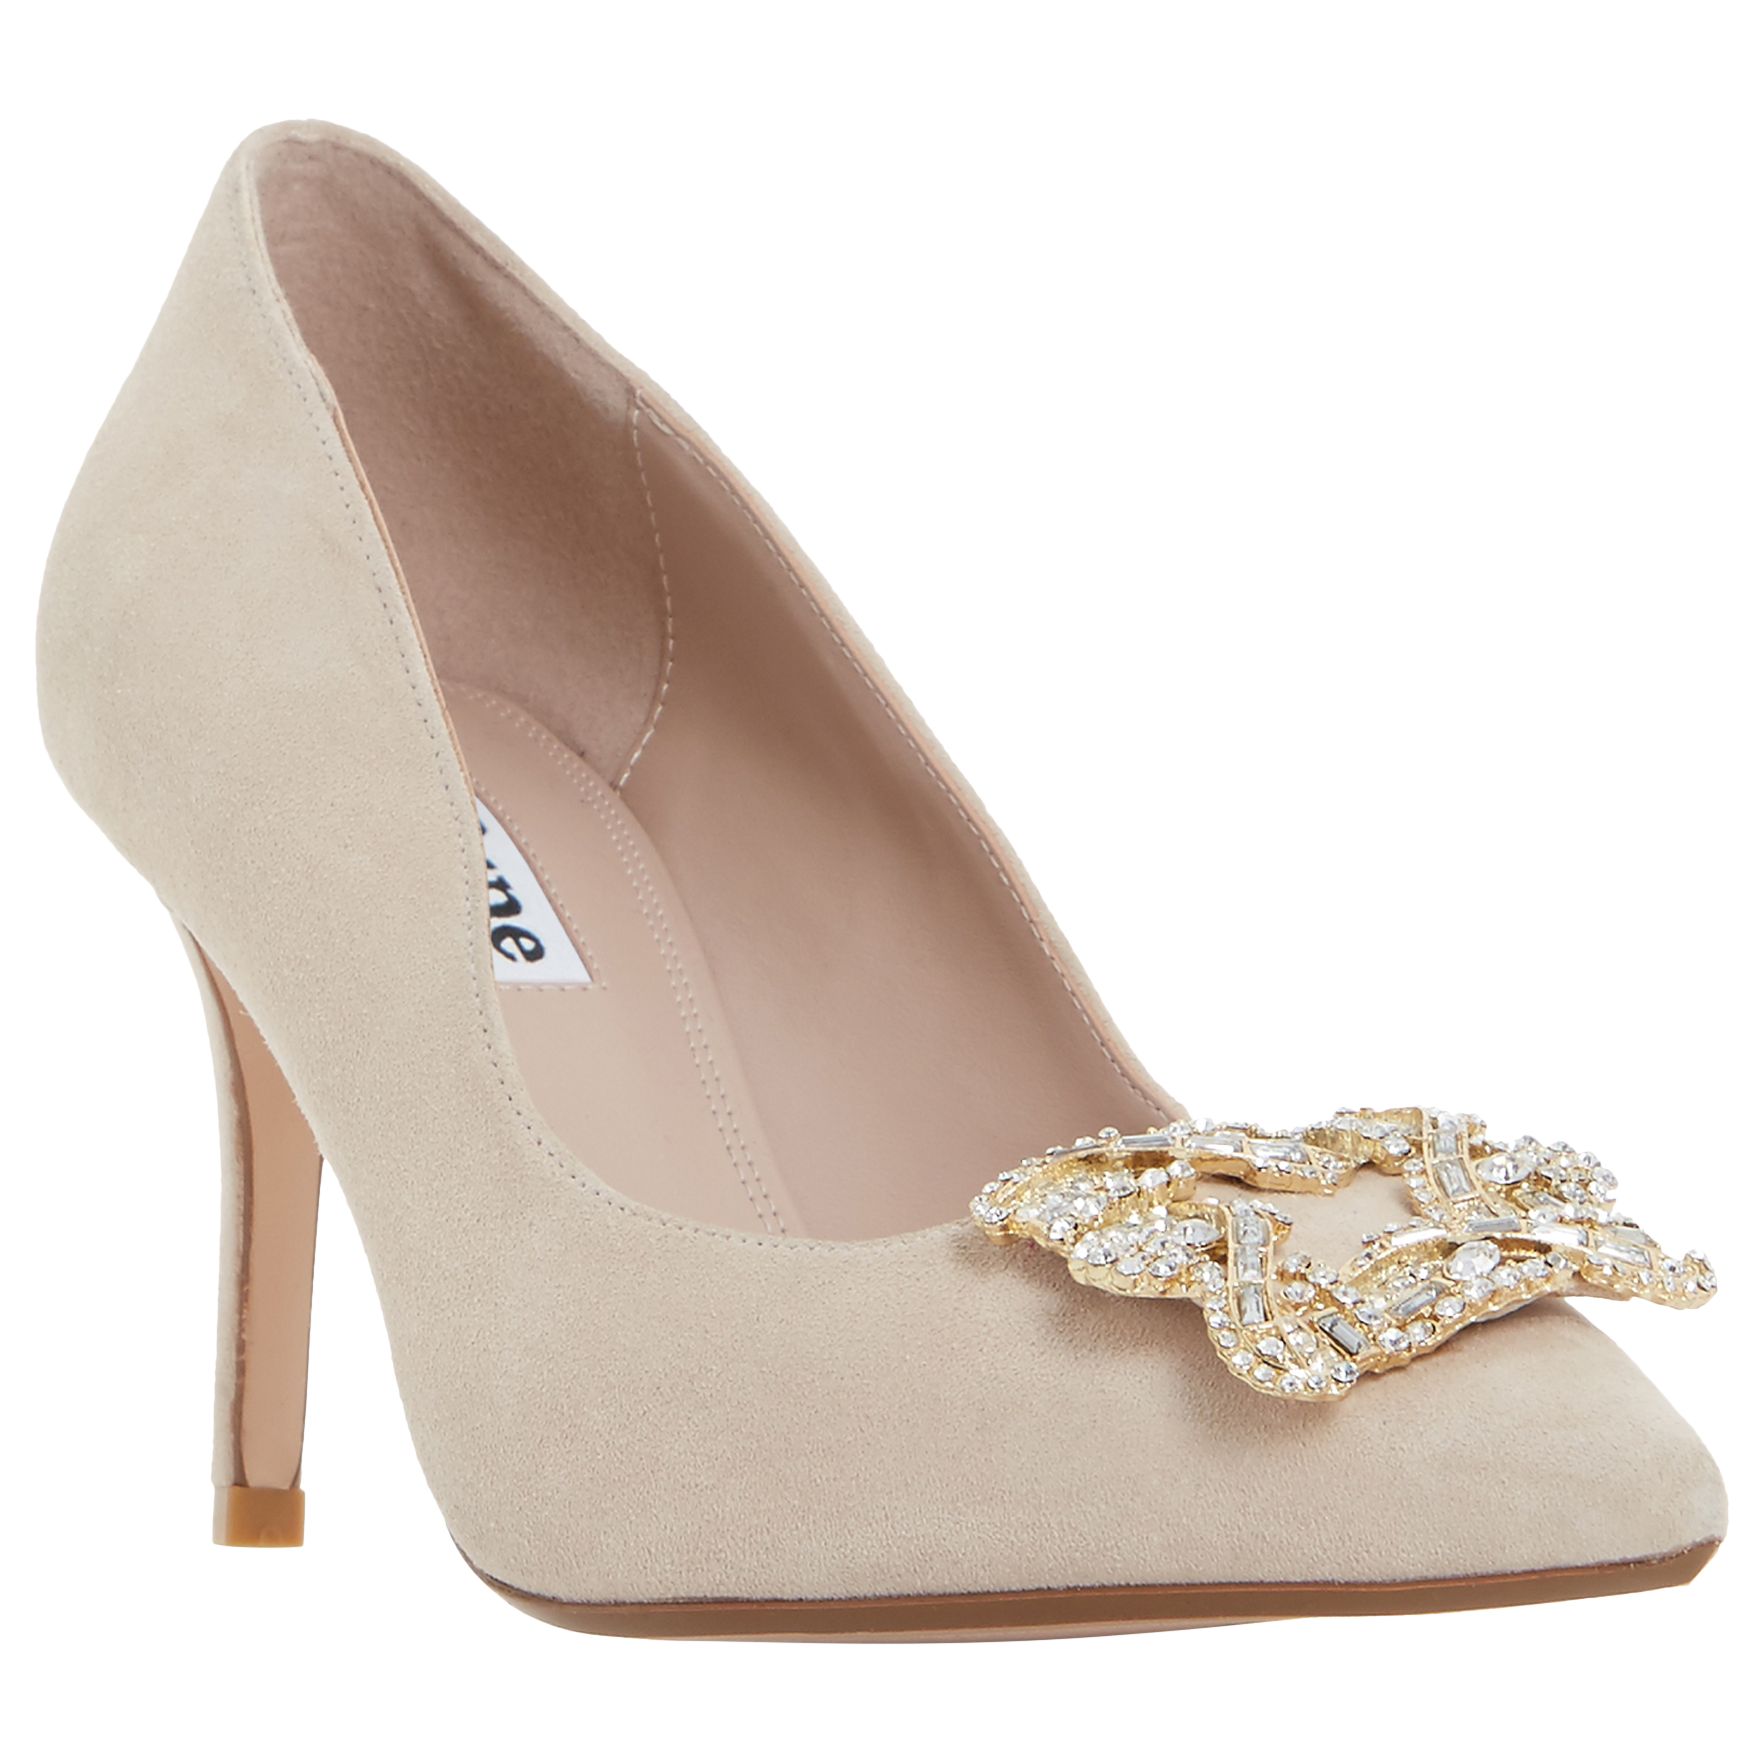 Dune Betti Embellished Stiletto Heeled Court Shoes, Nude Suede, 8